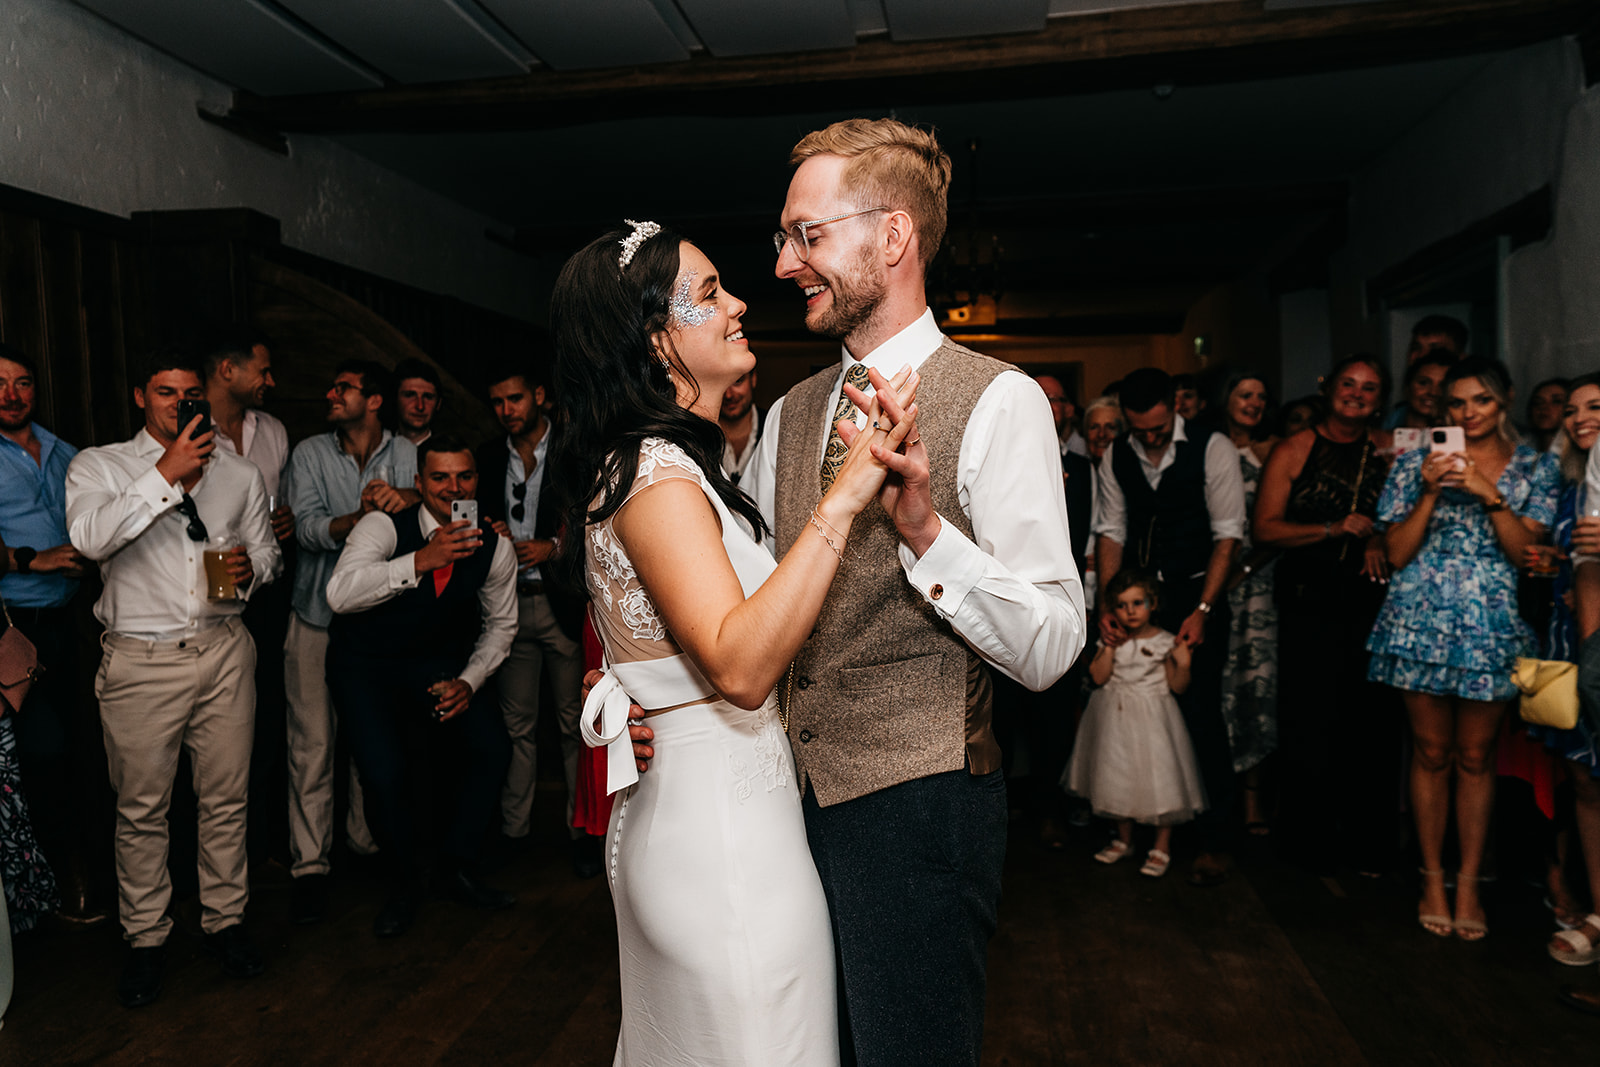 we filmed and photographed the bride and grooms first dance